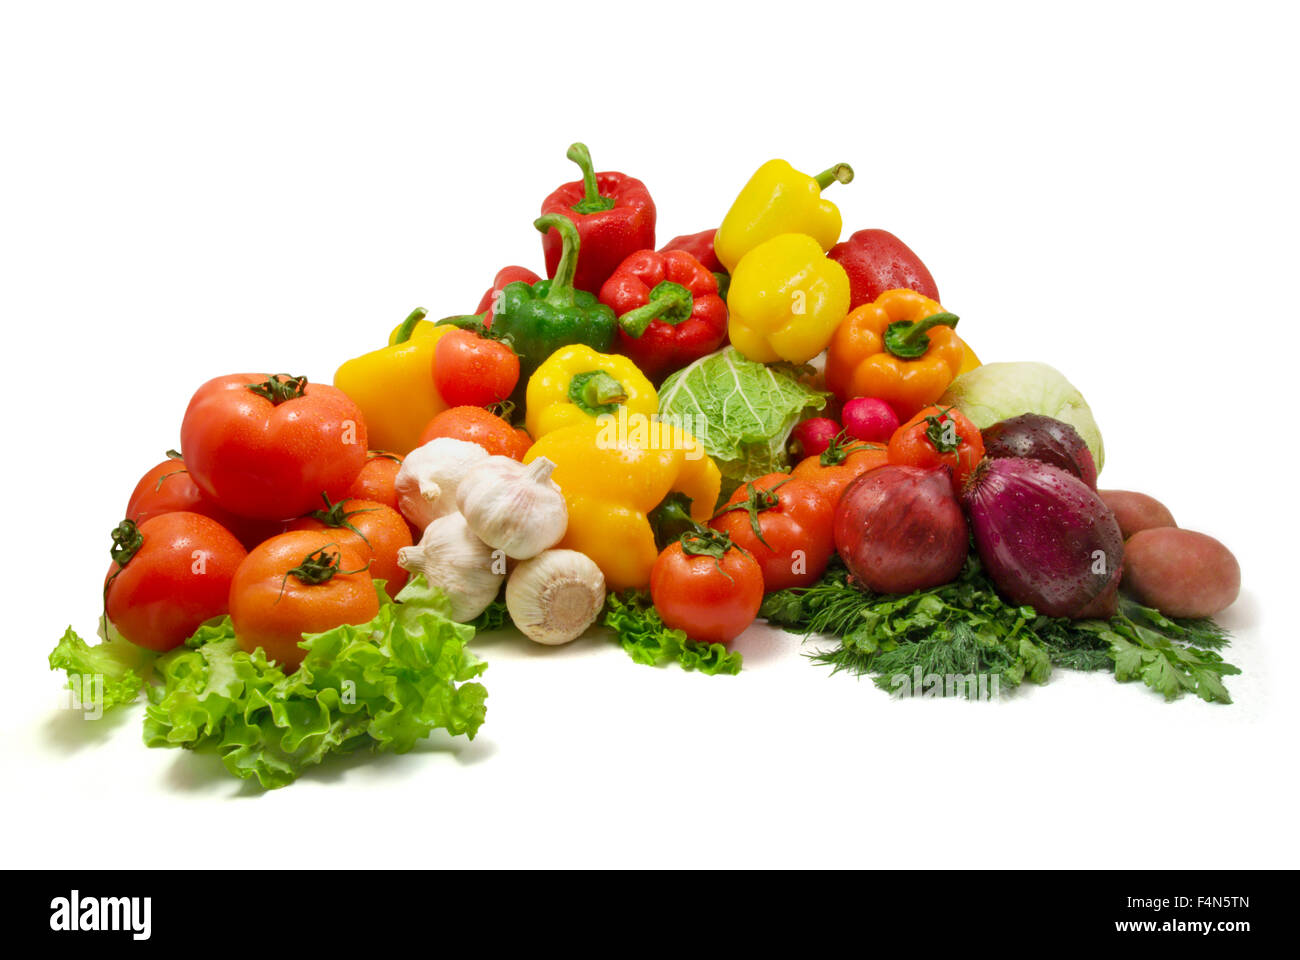 World culture, Bread and Wheat, Human food,Pineapple Juice, World Food,Tomato Juice, Green Food, Vegetables, Stock Photo